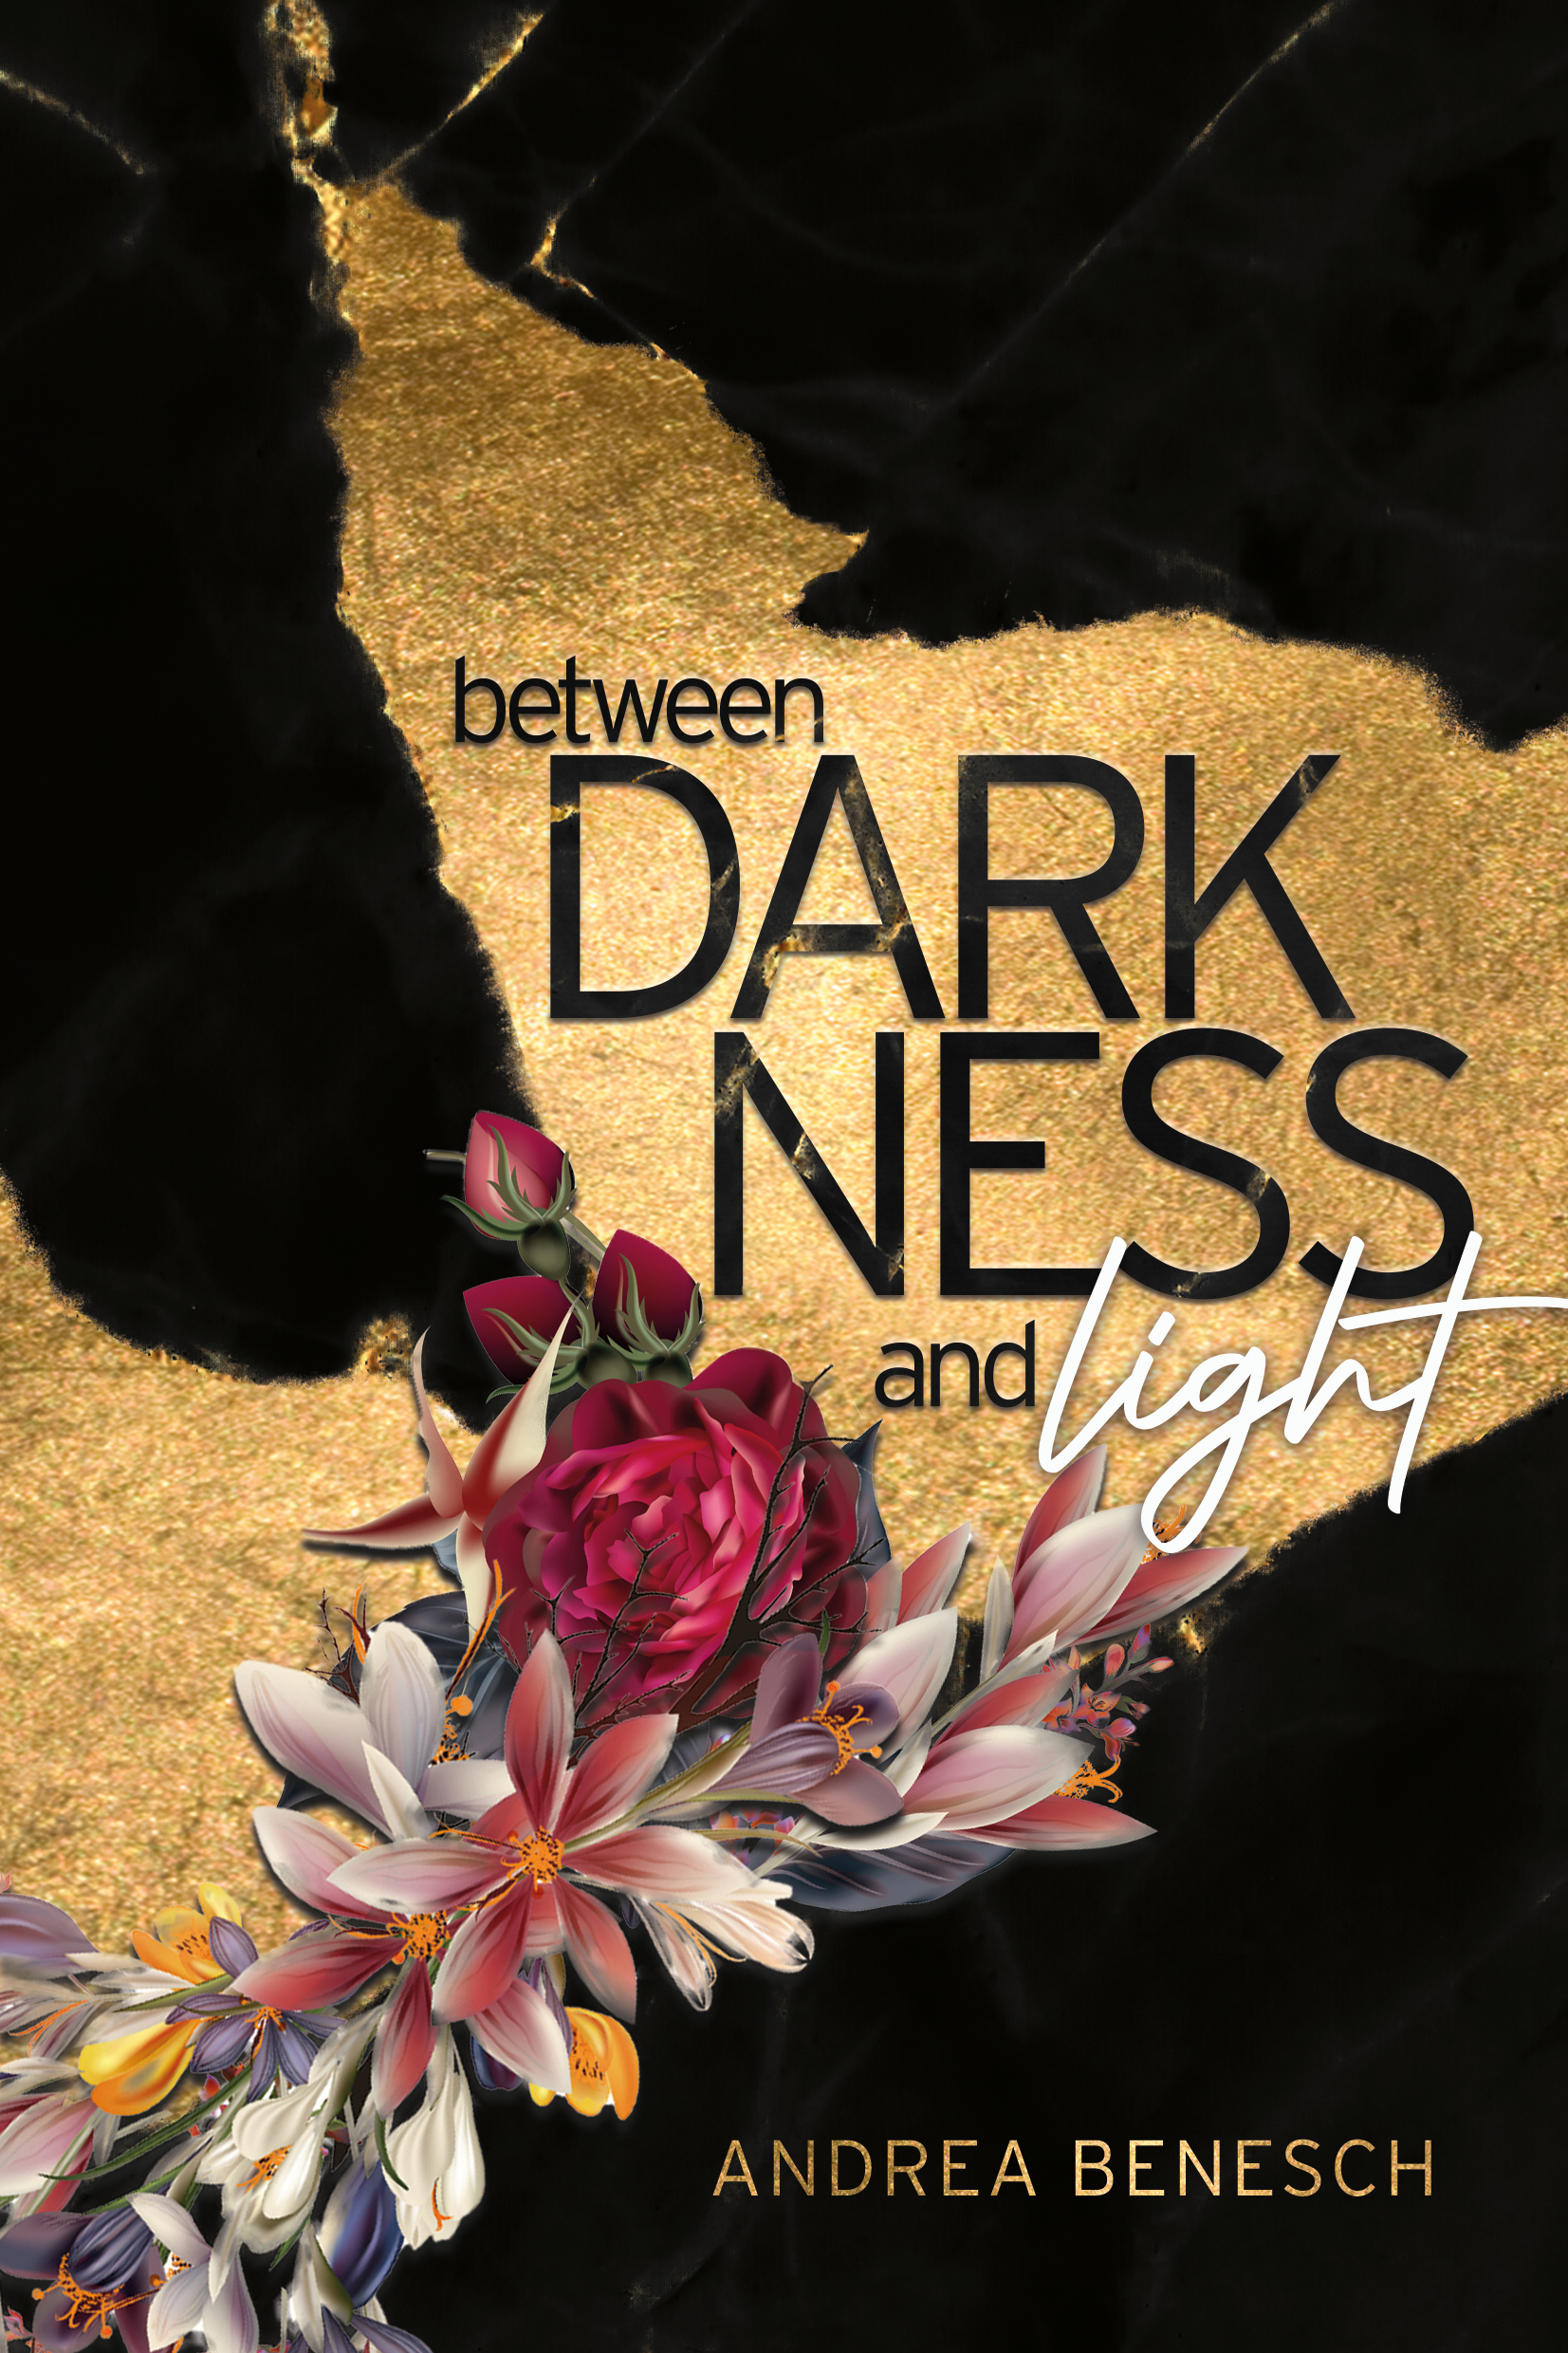 Between Darkness and Light